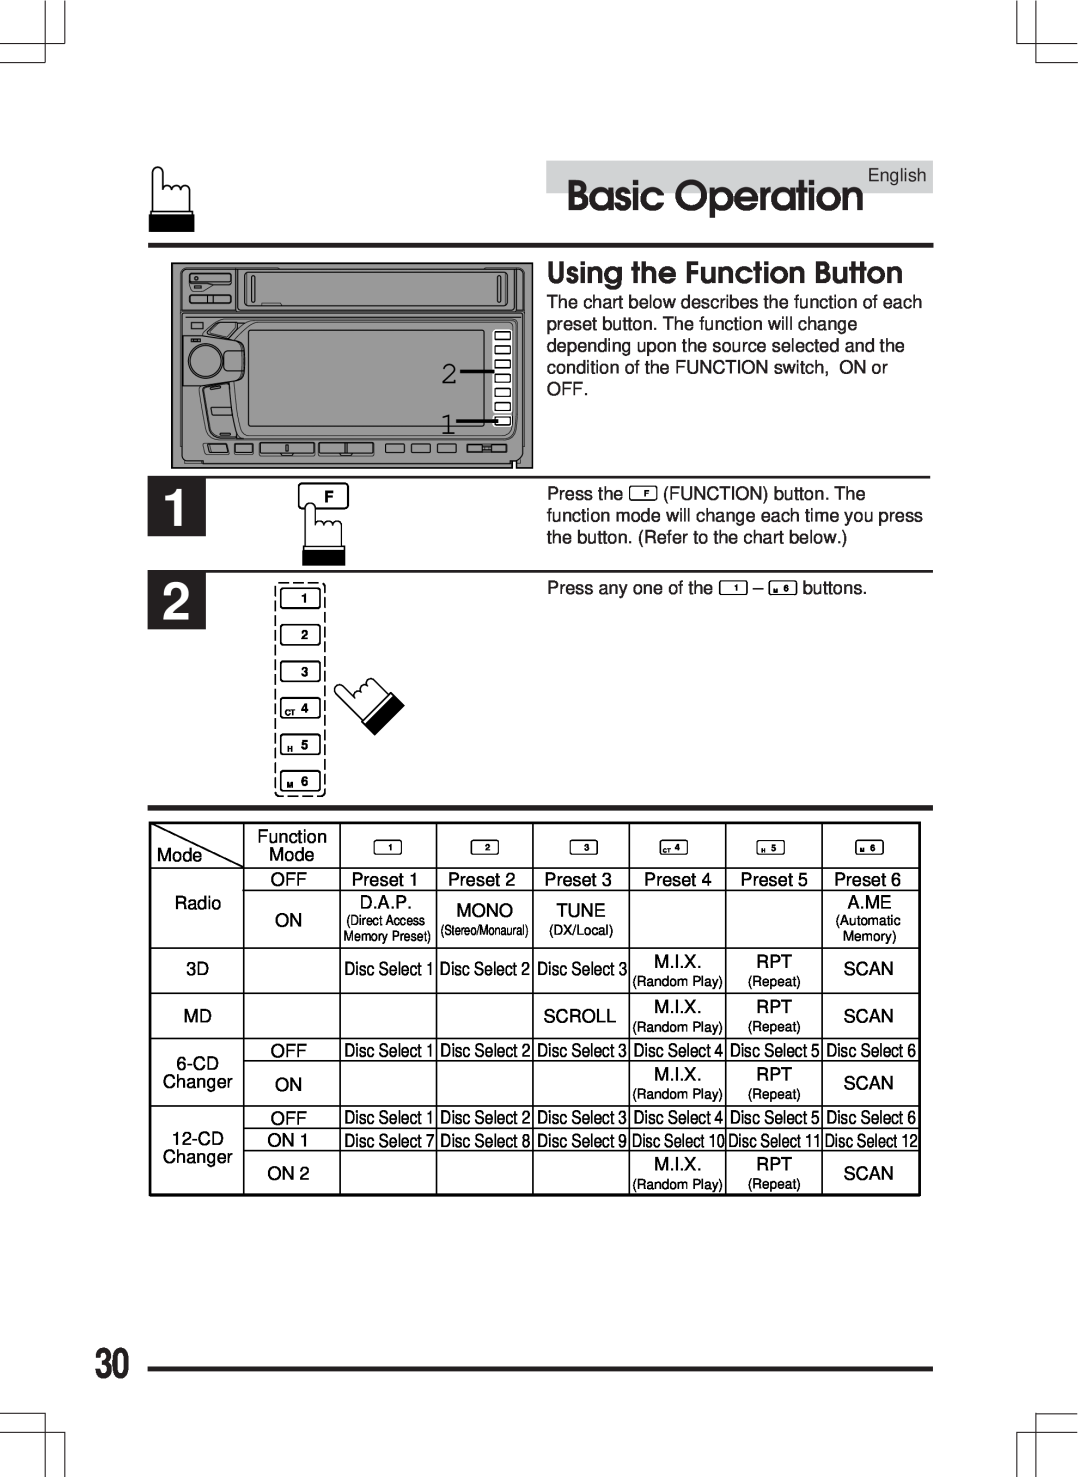 Alpine MDA-W890 Using the Function Button, Basic OperationEnglish, The chart below describes the function of each, Preset 